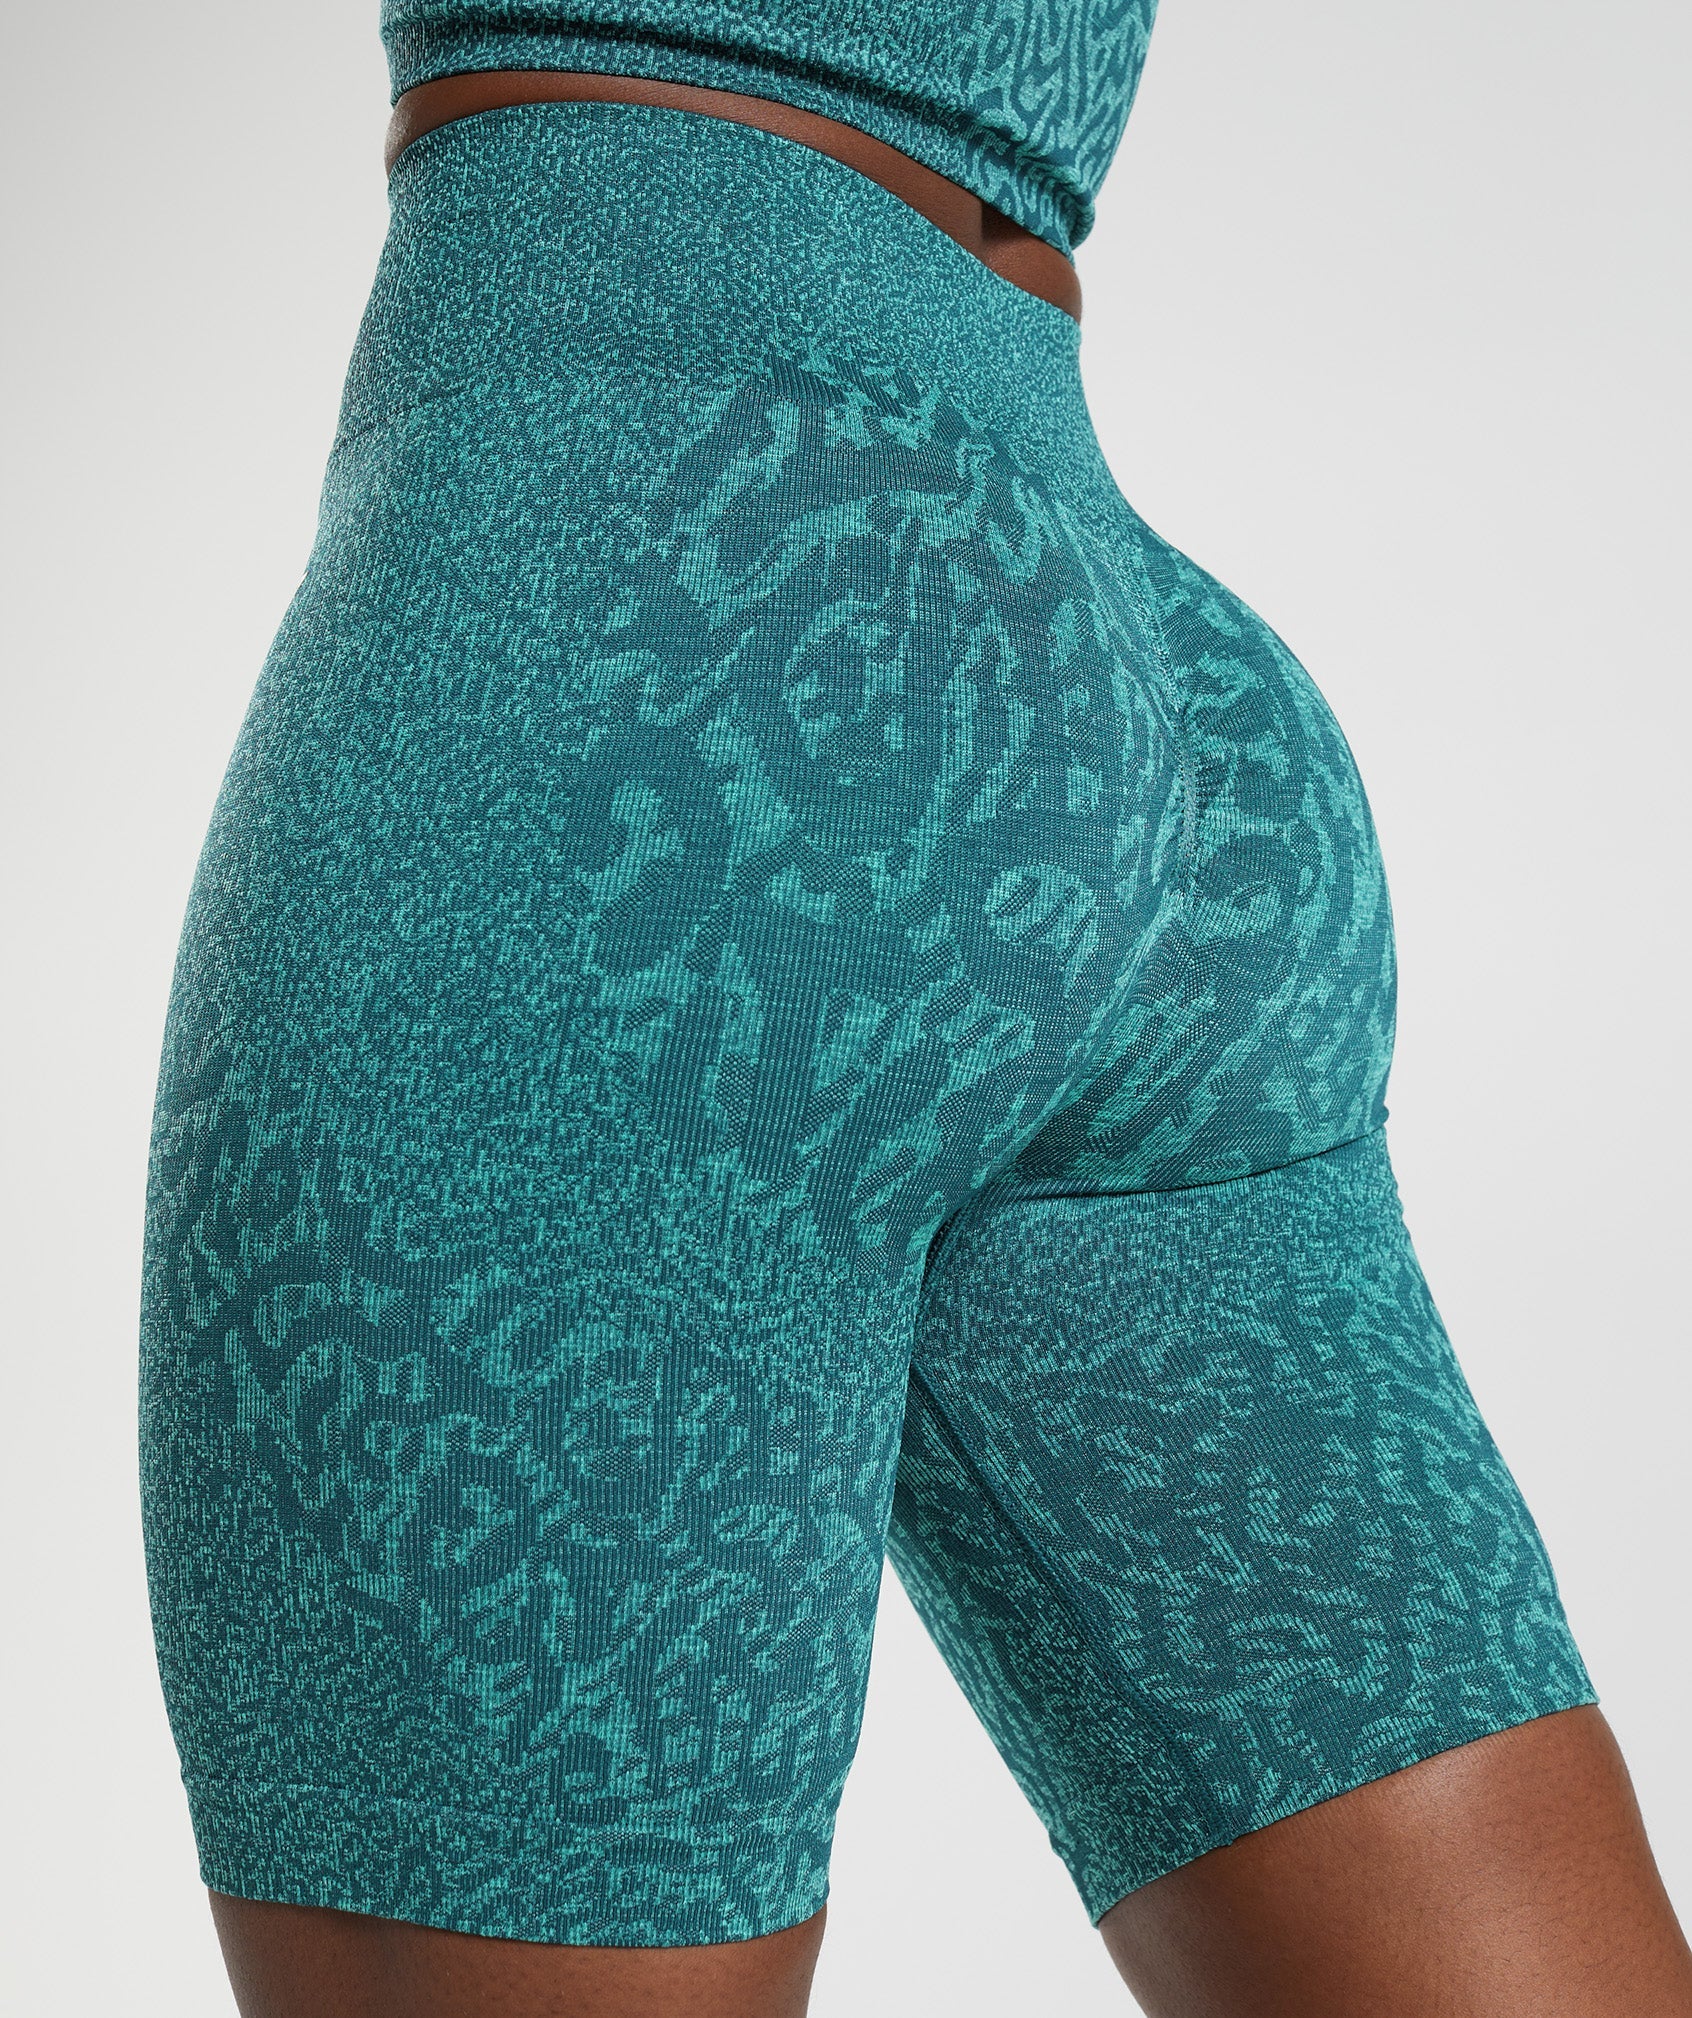 Adapt Animal Seamless Cycling Shorts in Reef | Winter Teal - view 5